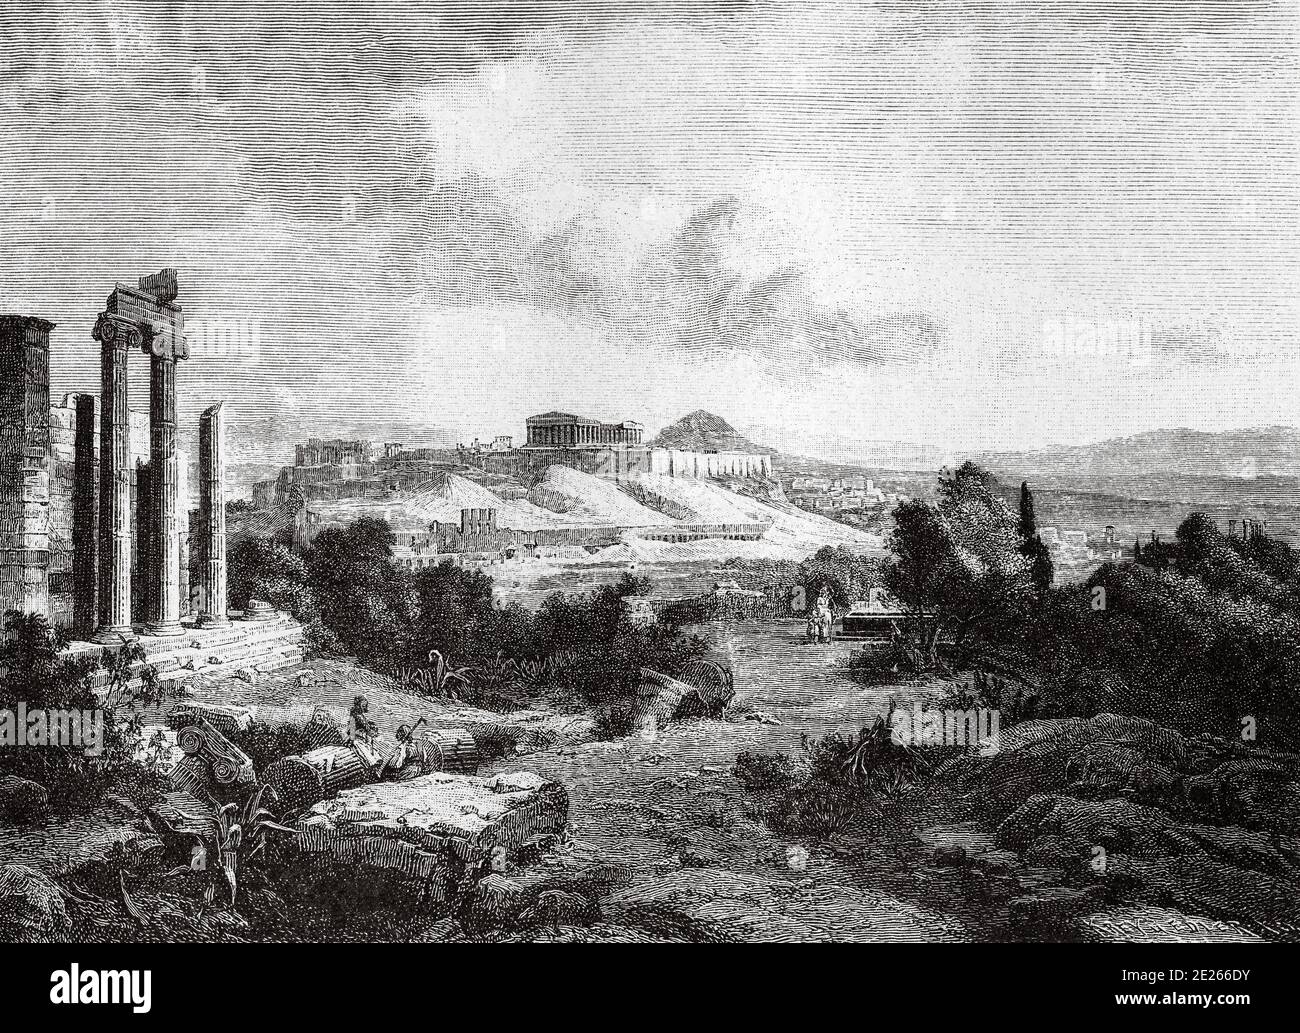 Athens and the Acropolis in 1800, 19th century. Greece ancient history. Old engraving illustration from the book Universal history by Oscar Jager 1890 Stock Photo